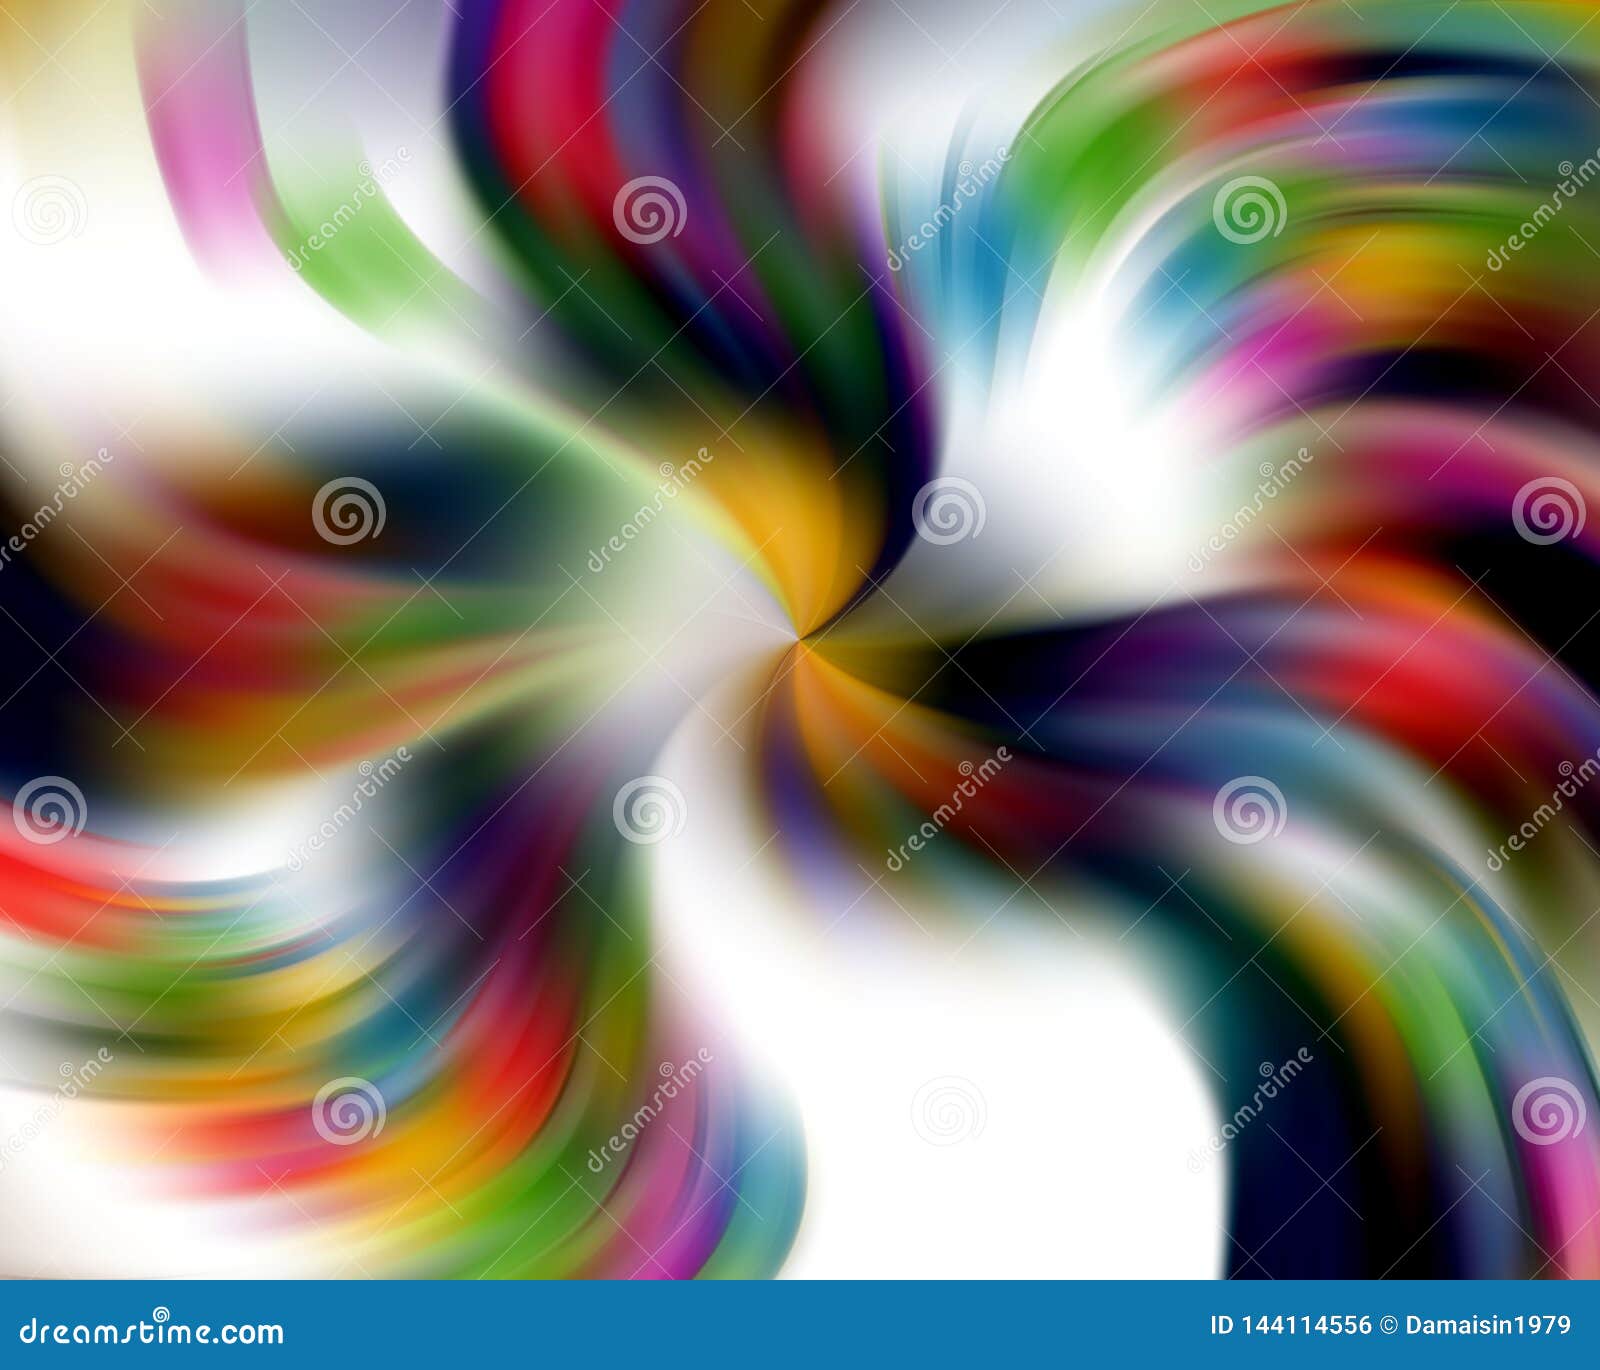 Multicolored Rainbow Lines Abstract Background Stock Illustration ...